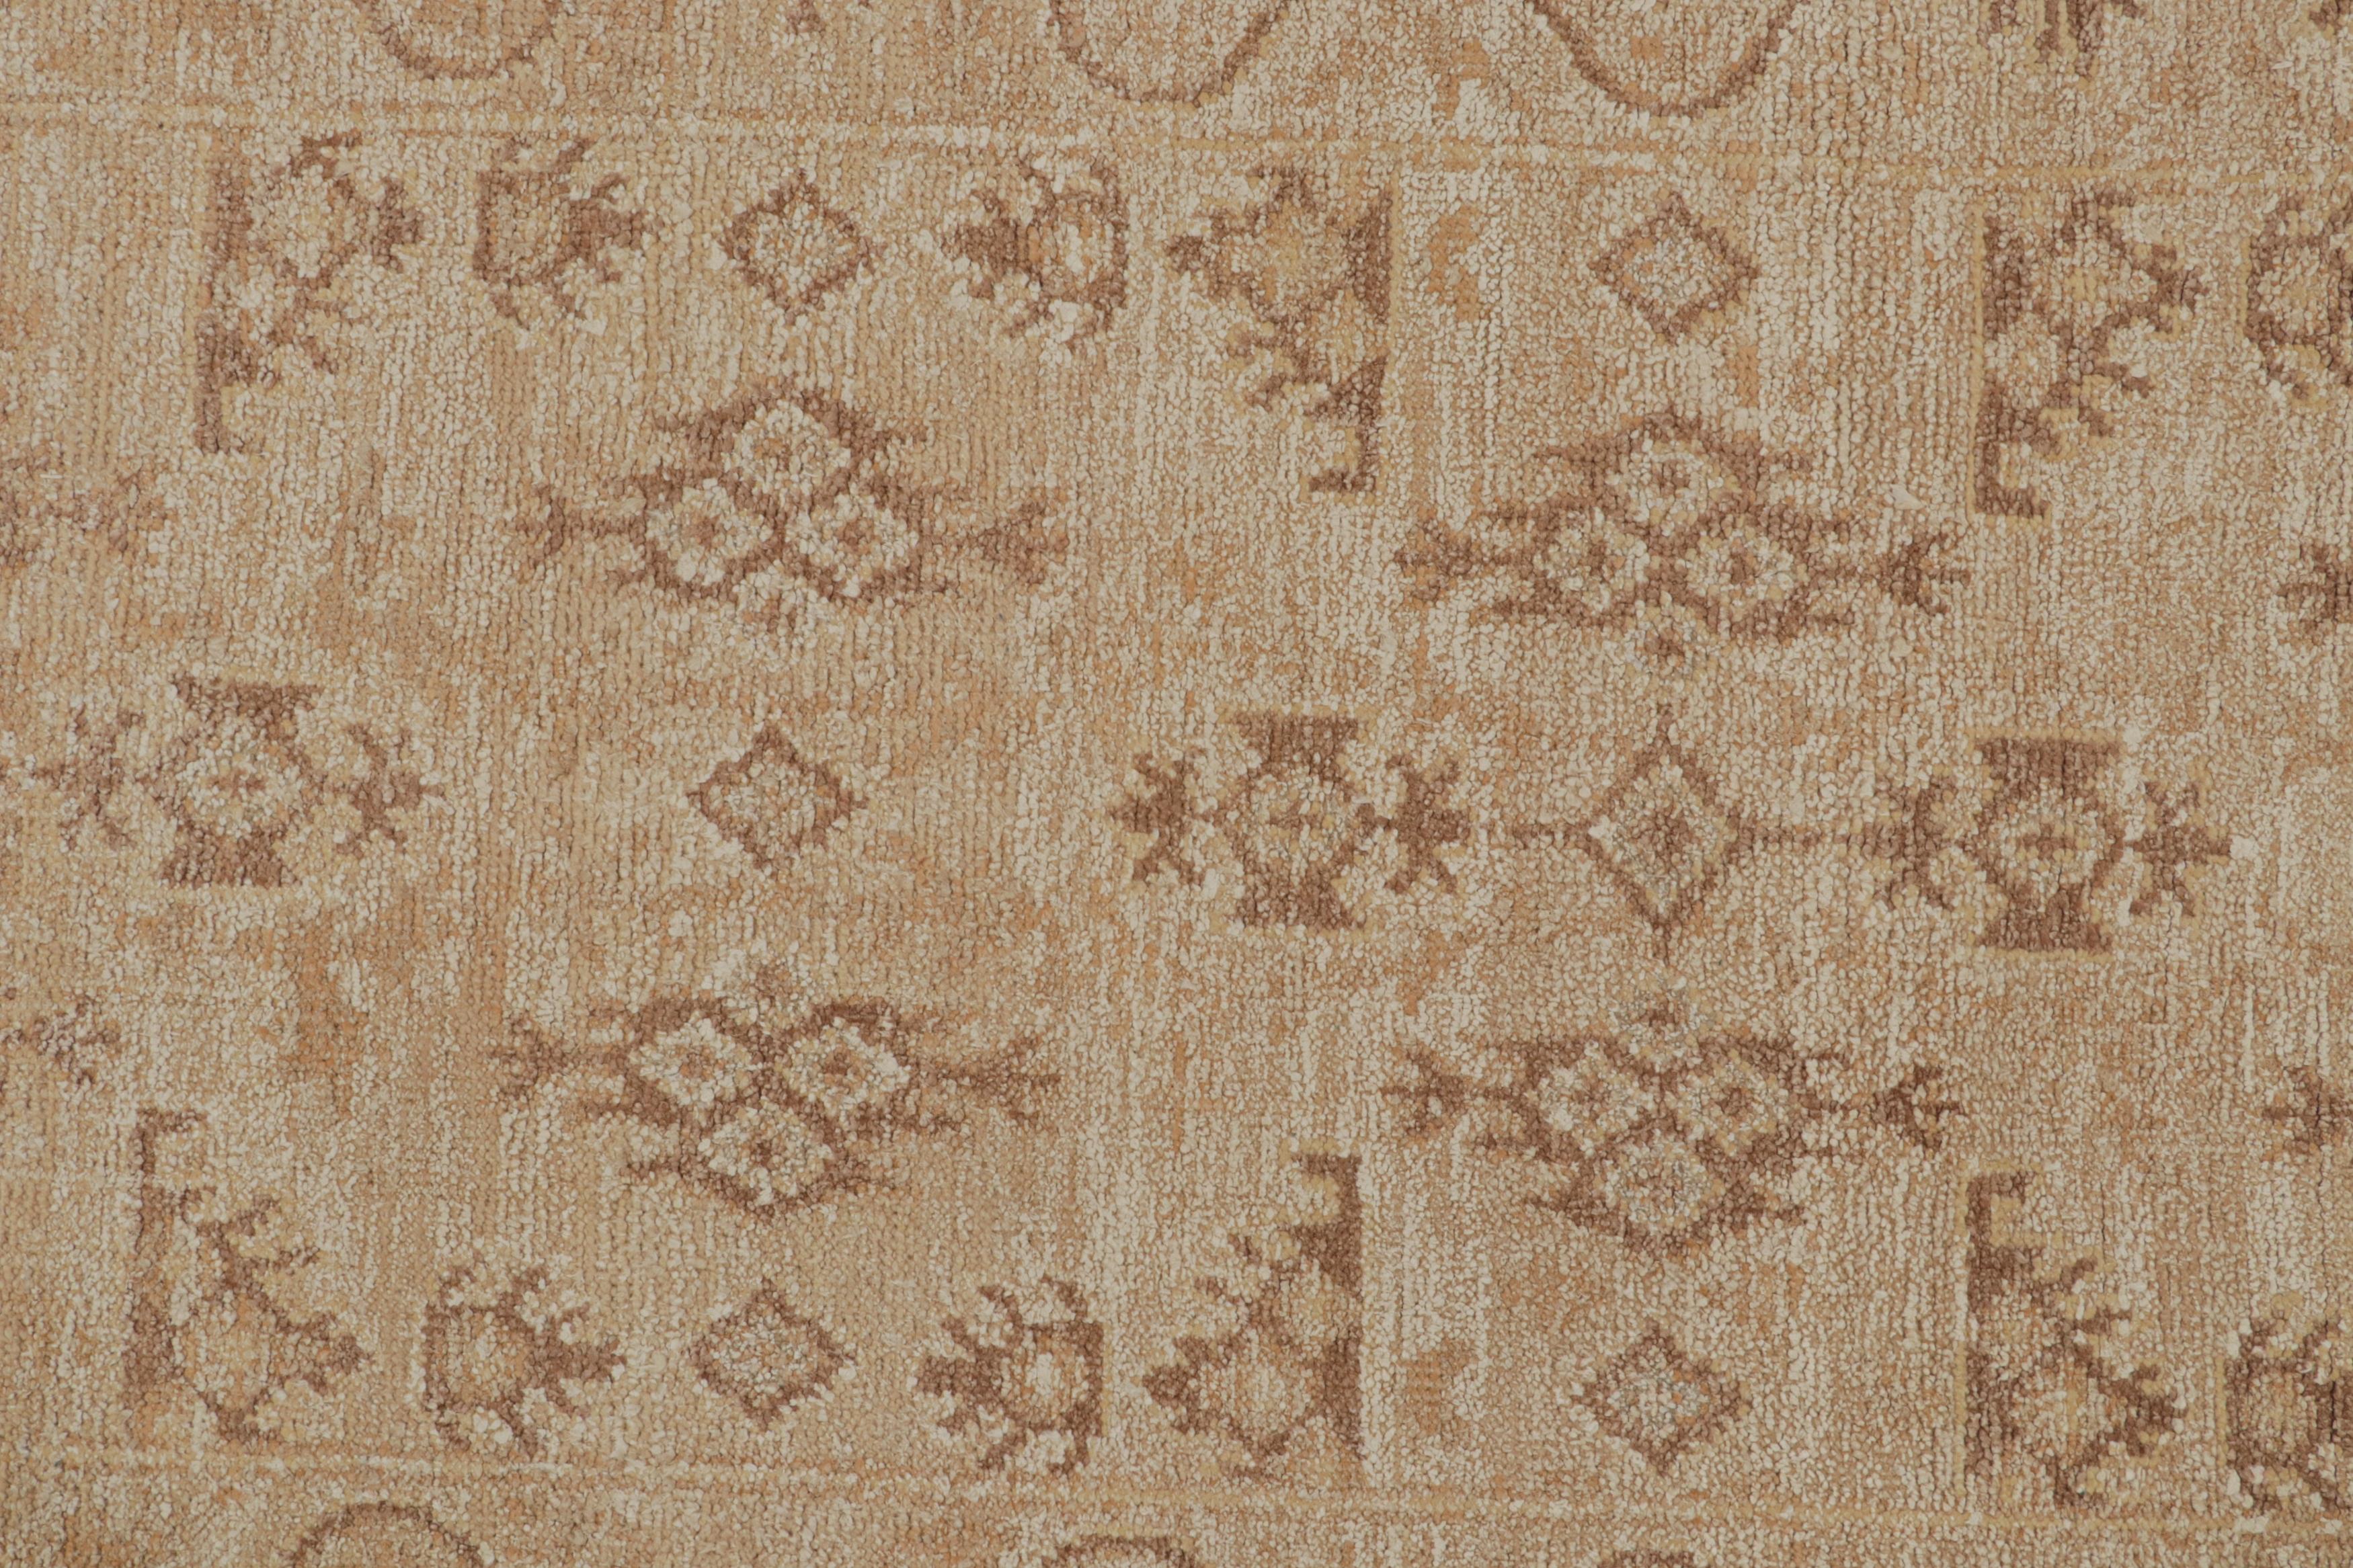 Contemporary Rug & Kilim’s Oushak Style Rug in Beige-Brown Floral Pattern For Sale